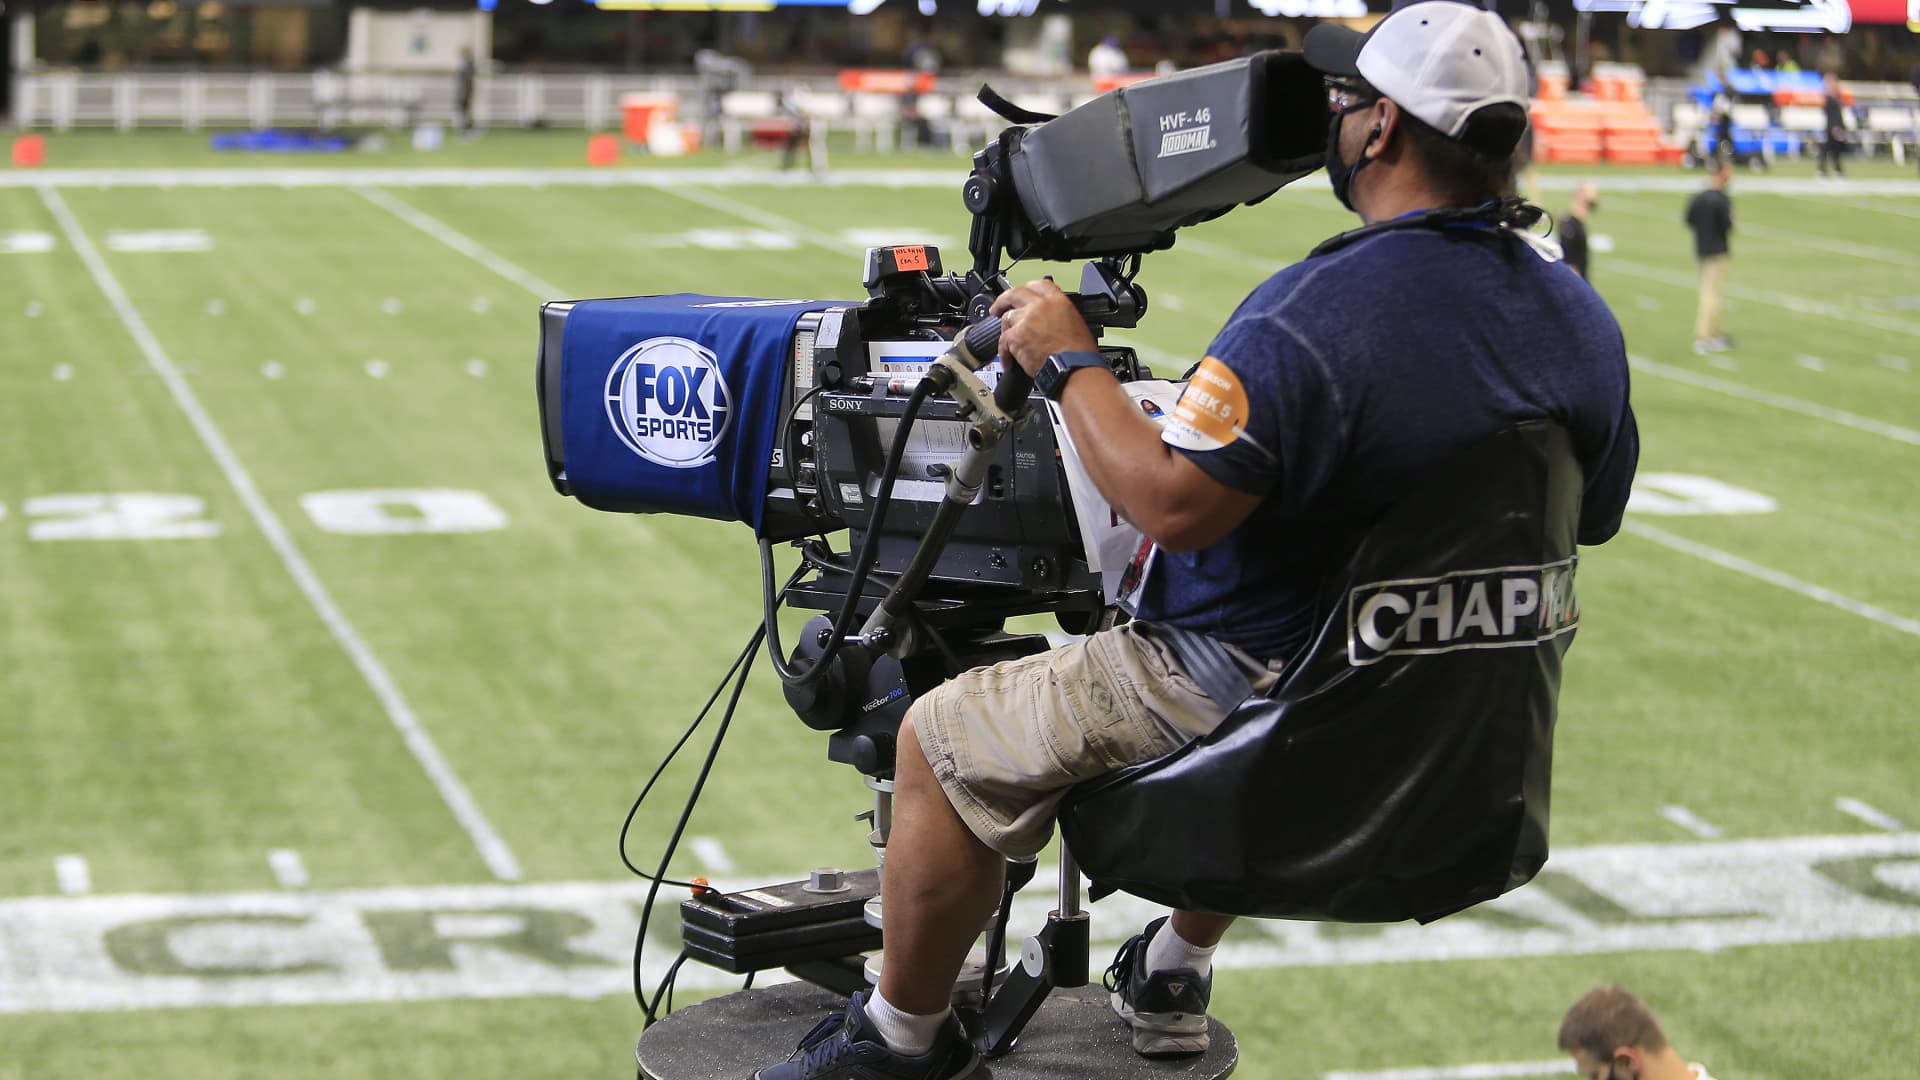 A FOX Sports TV camera operator during the week 5 NFL game between the Atlanta Falcons and the Carolina Panthers at Mercedes-Benz Stadium on October 11, 2020 in Atlanta, Georgia.